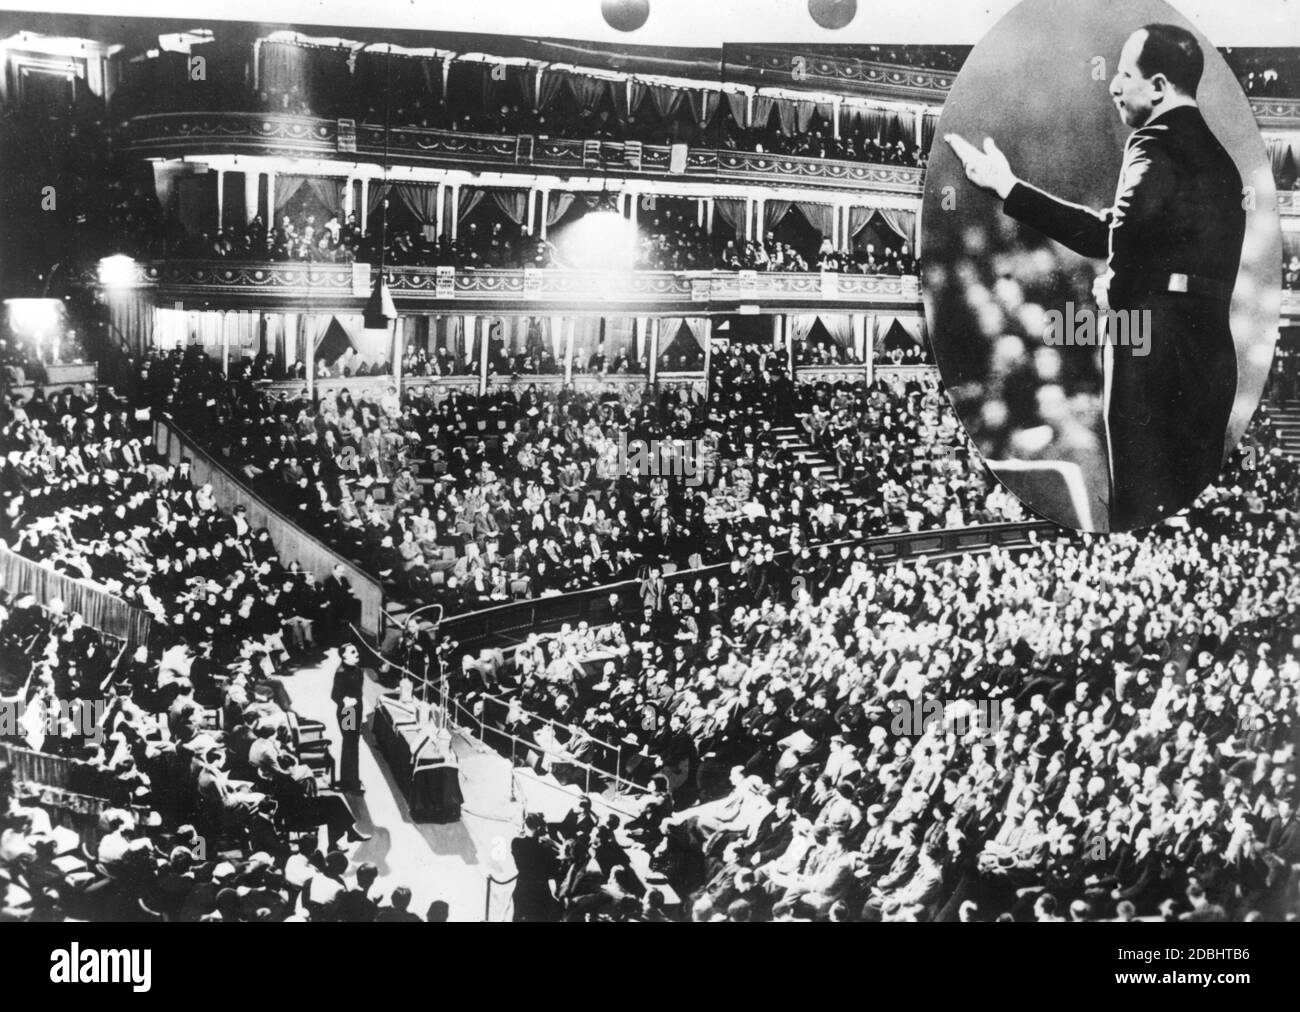 'Oswald Mosley (small picture), leader of the ''British Union of Fascists'' (BUF), speaking at a fascist rally in the Royal Albert Hall.' Stock Photo